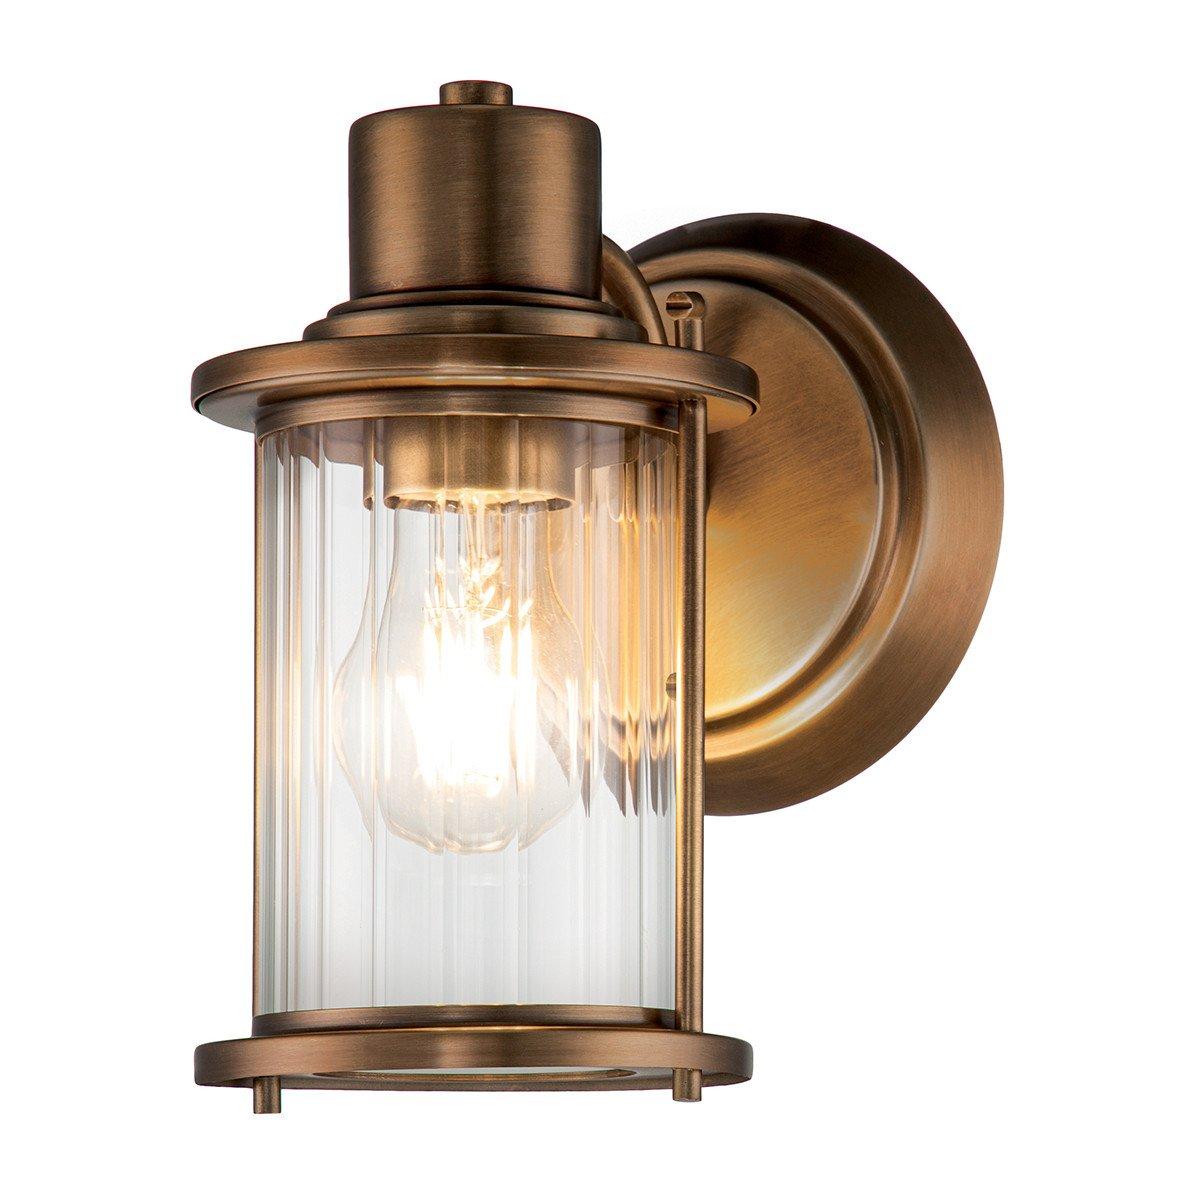 Quoizel Riggs Wall Lamp Weathered Brass IP44